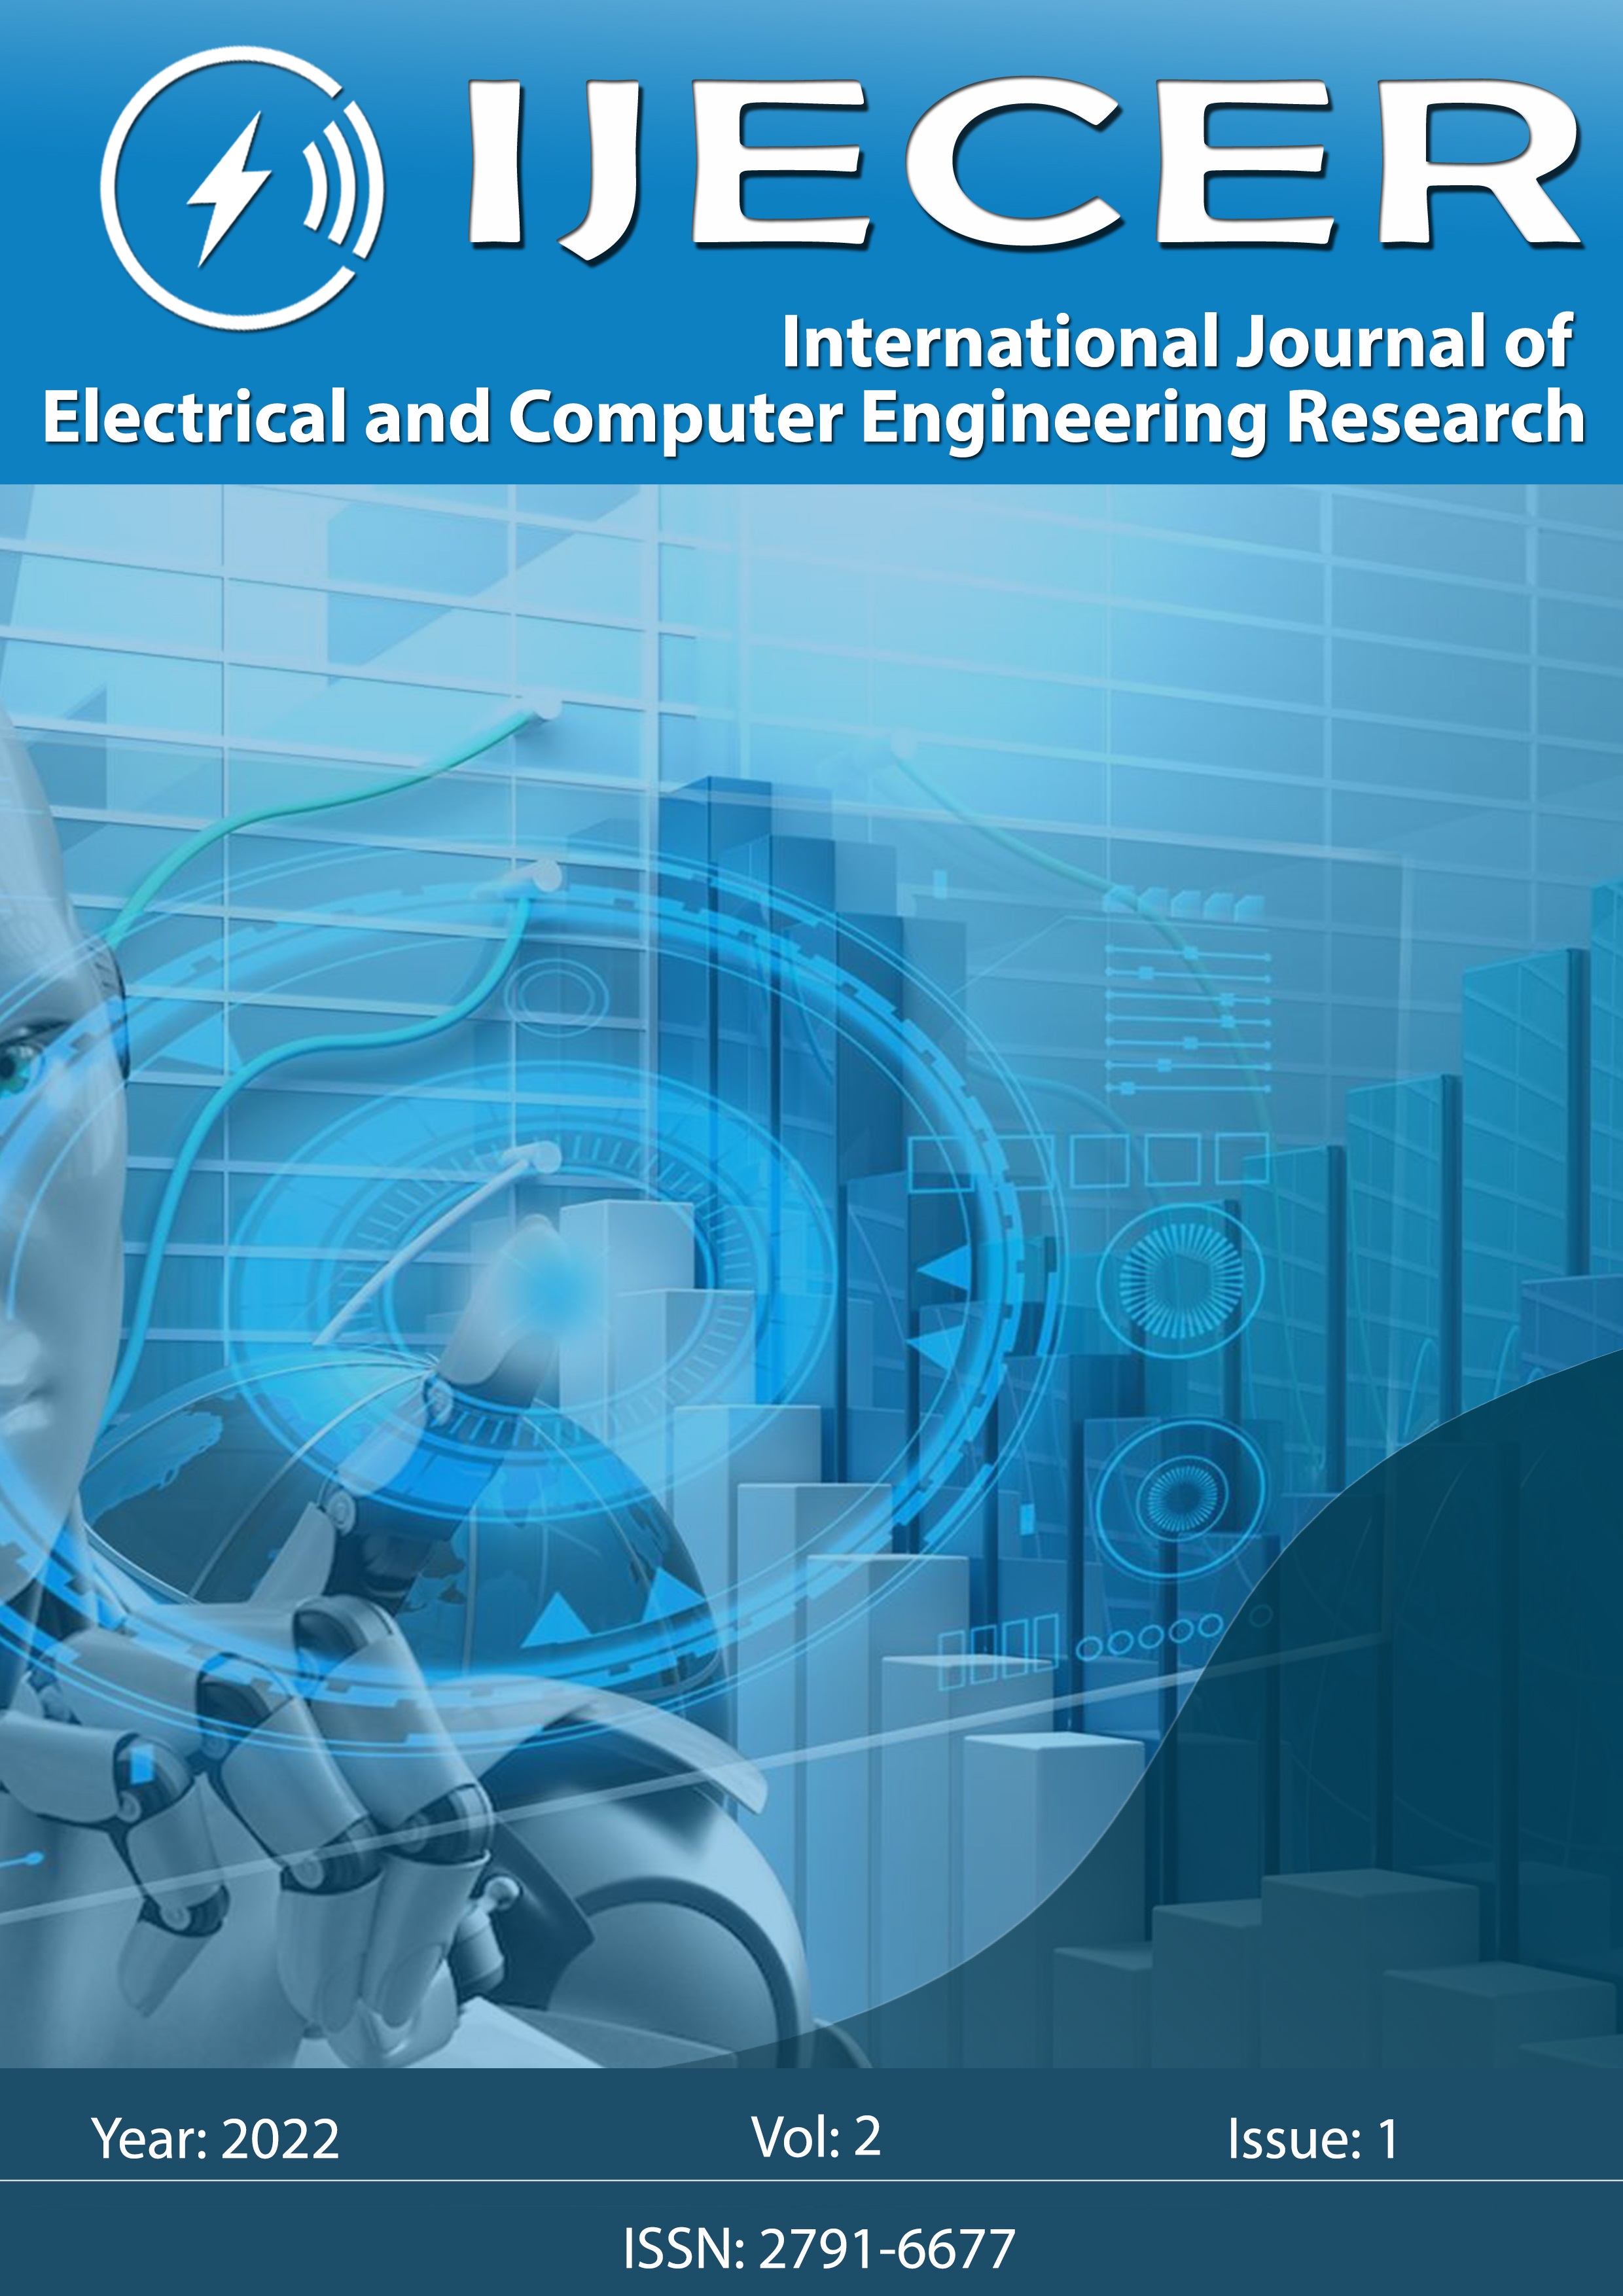 					View Vol. 2 No. 1 (2022): International Journal of Electrical and Computer Engineering Research
				